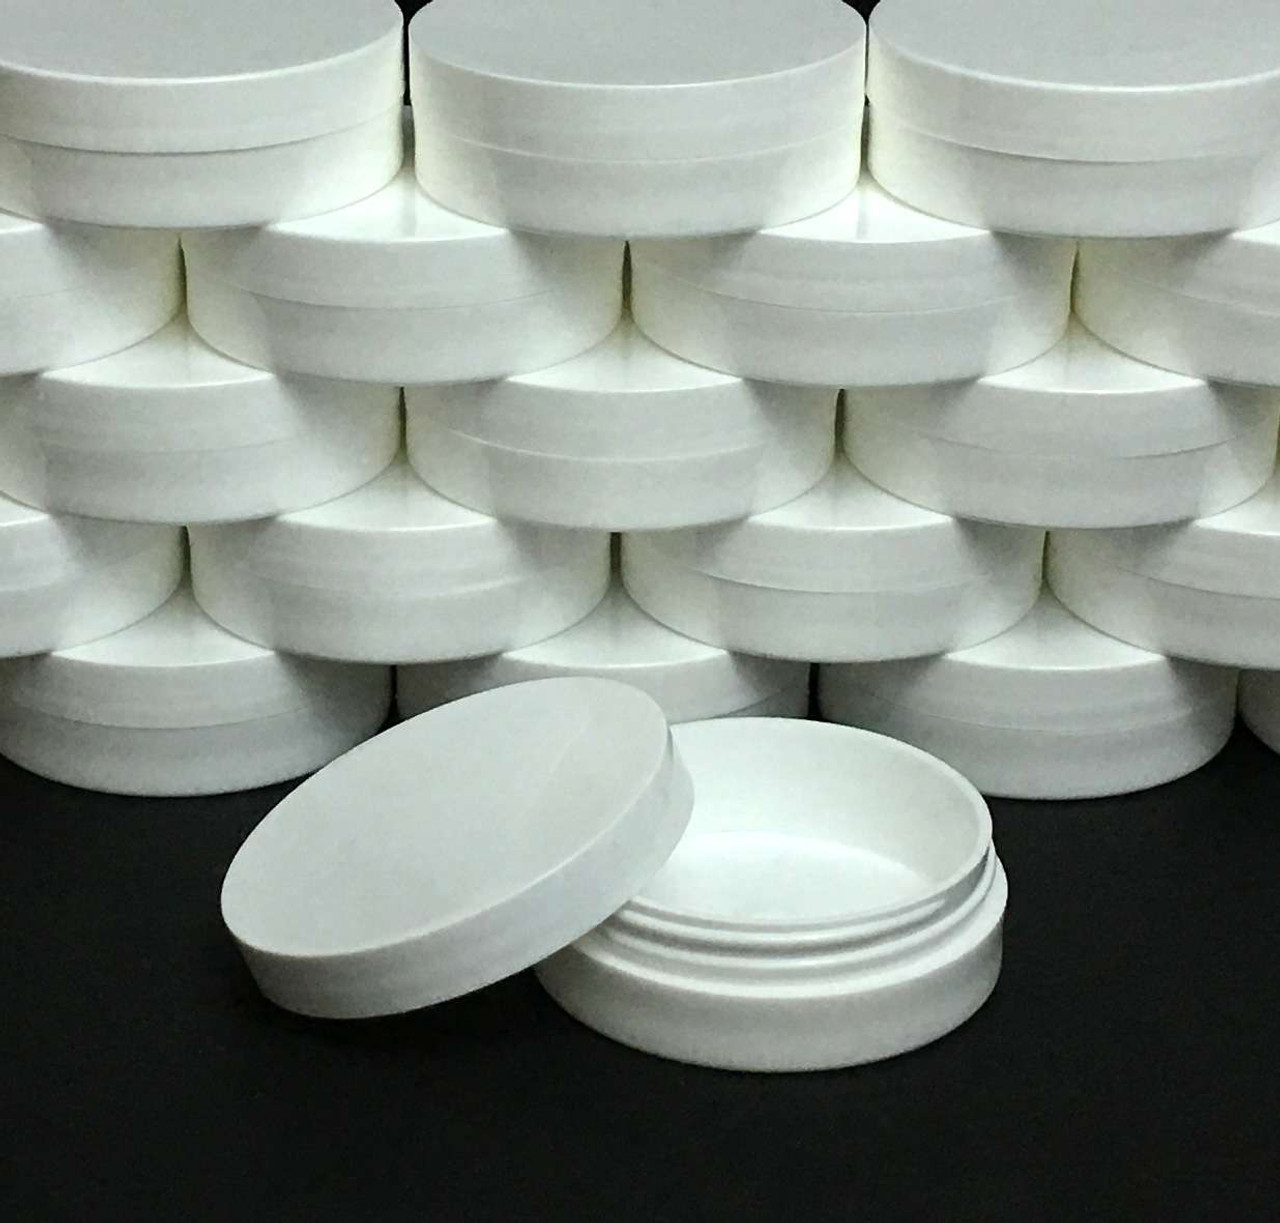 https://cdn11.bigcommerce.com/s-qd7k5gxi/images/stencil/1280x1280/products/481/7135/Plastic-Cosmetic-Containers-Low-Profile-Wide-Mouth-White-Jars-with-Lids-1-oz-White-Black-Cap-9351-9352-Beauty-Makeup-Supply_3483__39867.1661390814.jpg?c=2?imbypass=on